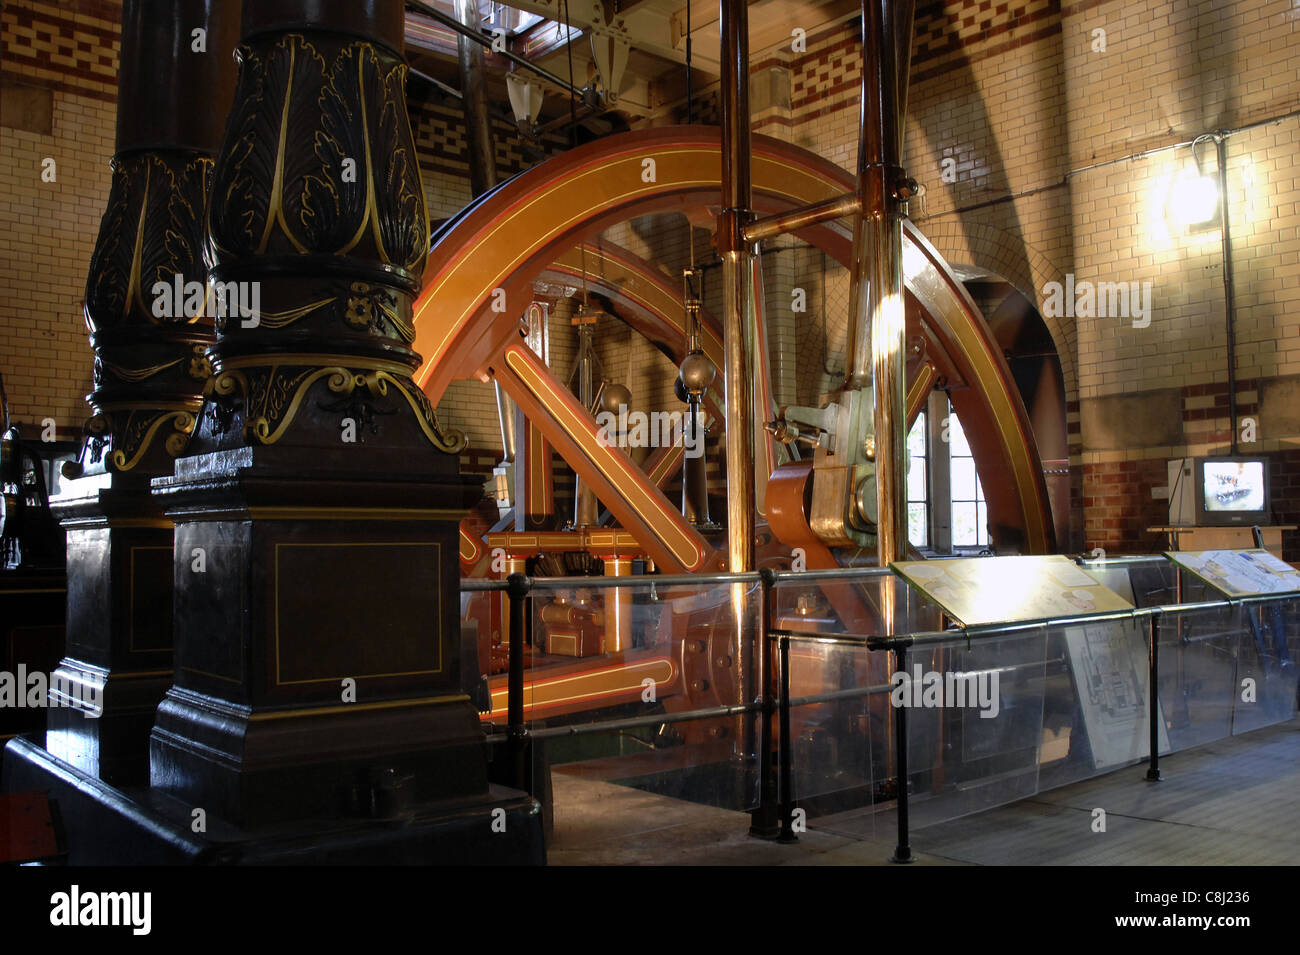 Victorian beam engines at Abbey Pumping Station in Leicester. Made by Gimpson's of Leicester in 1891, rare Woolf style engines. Stock Photo